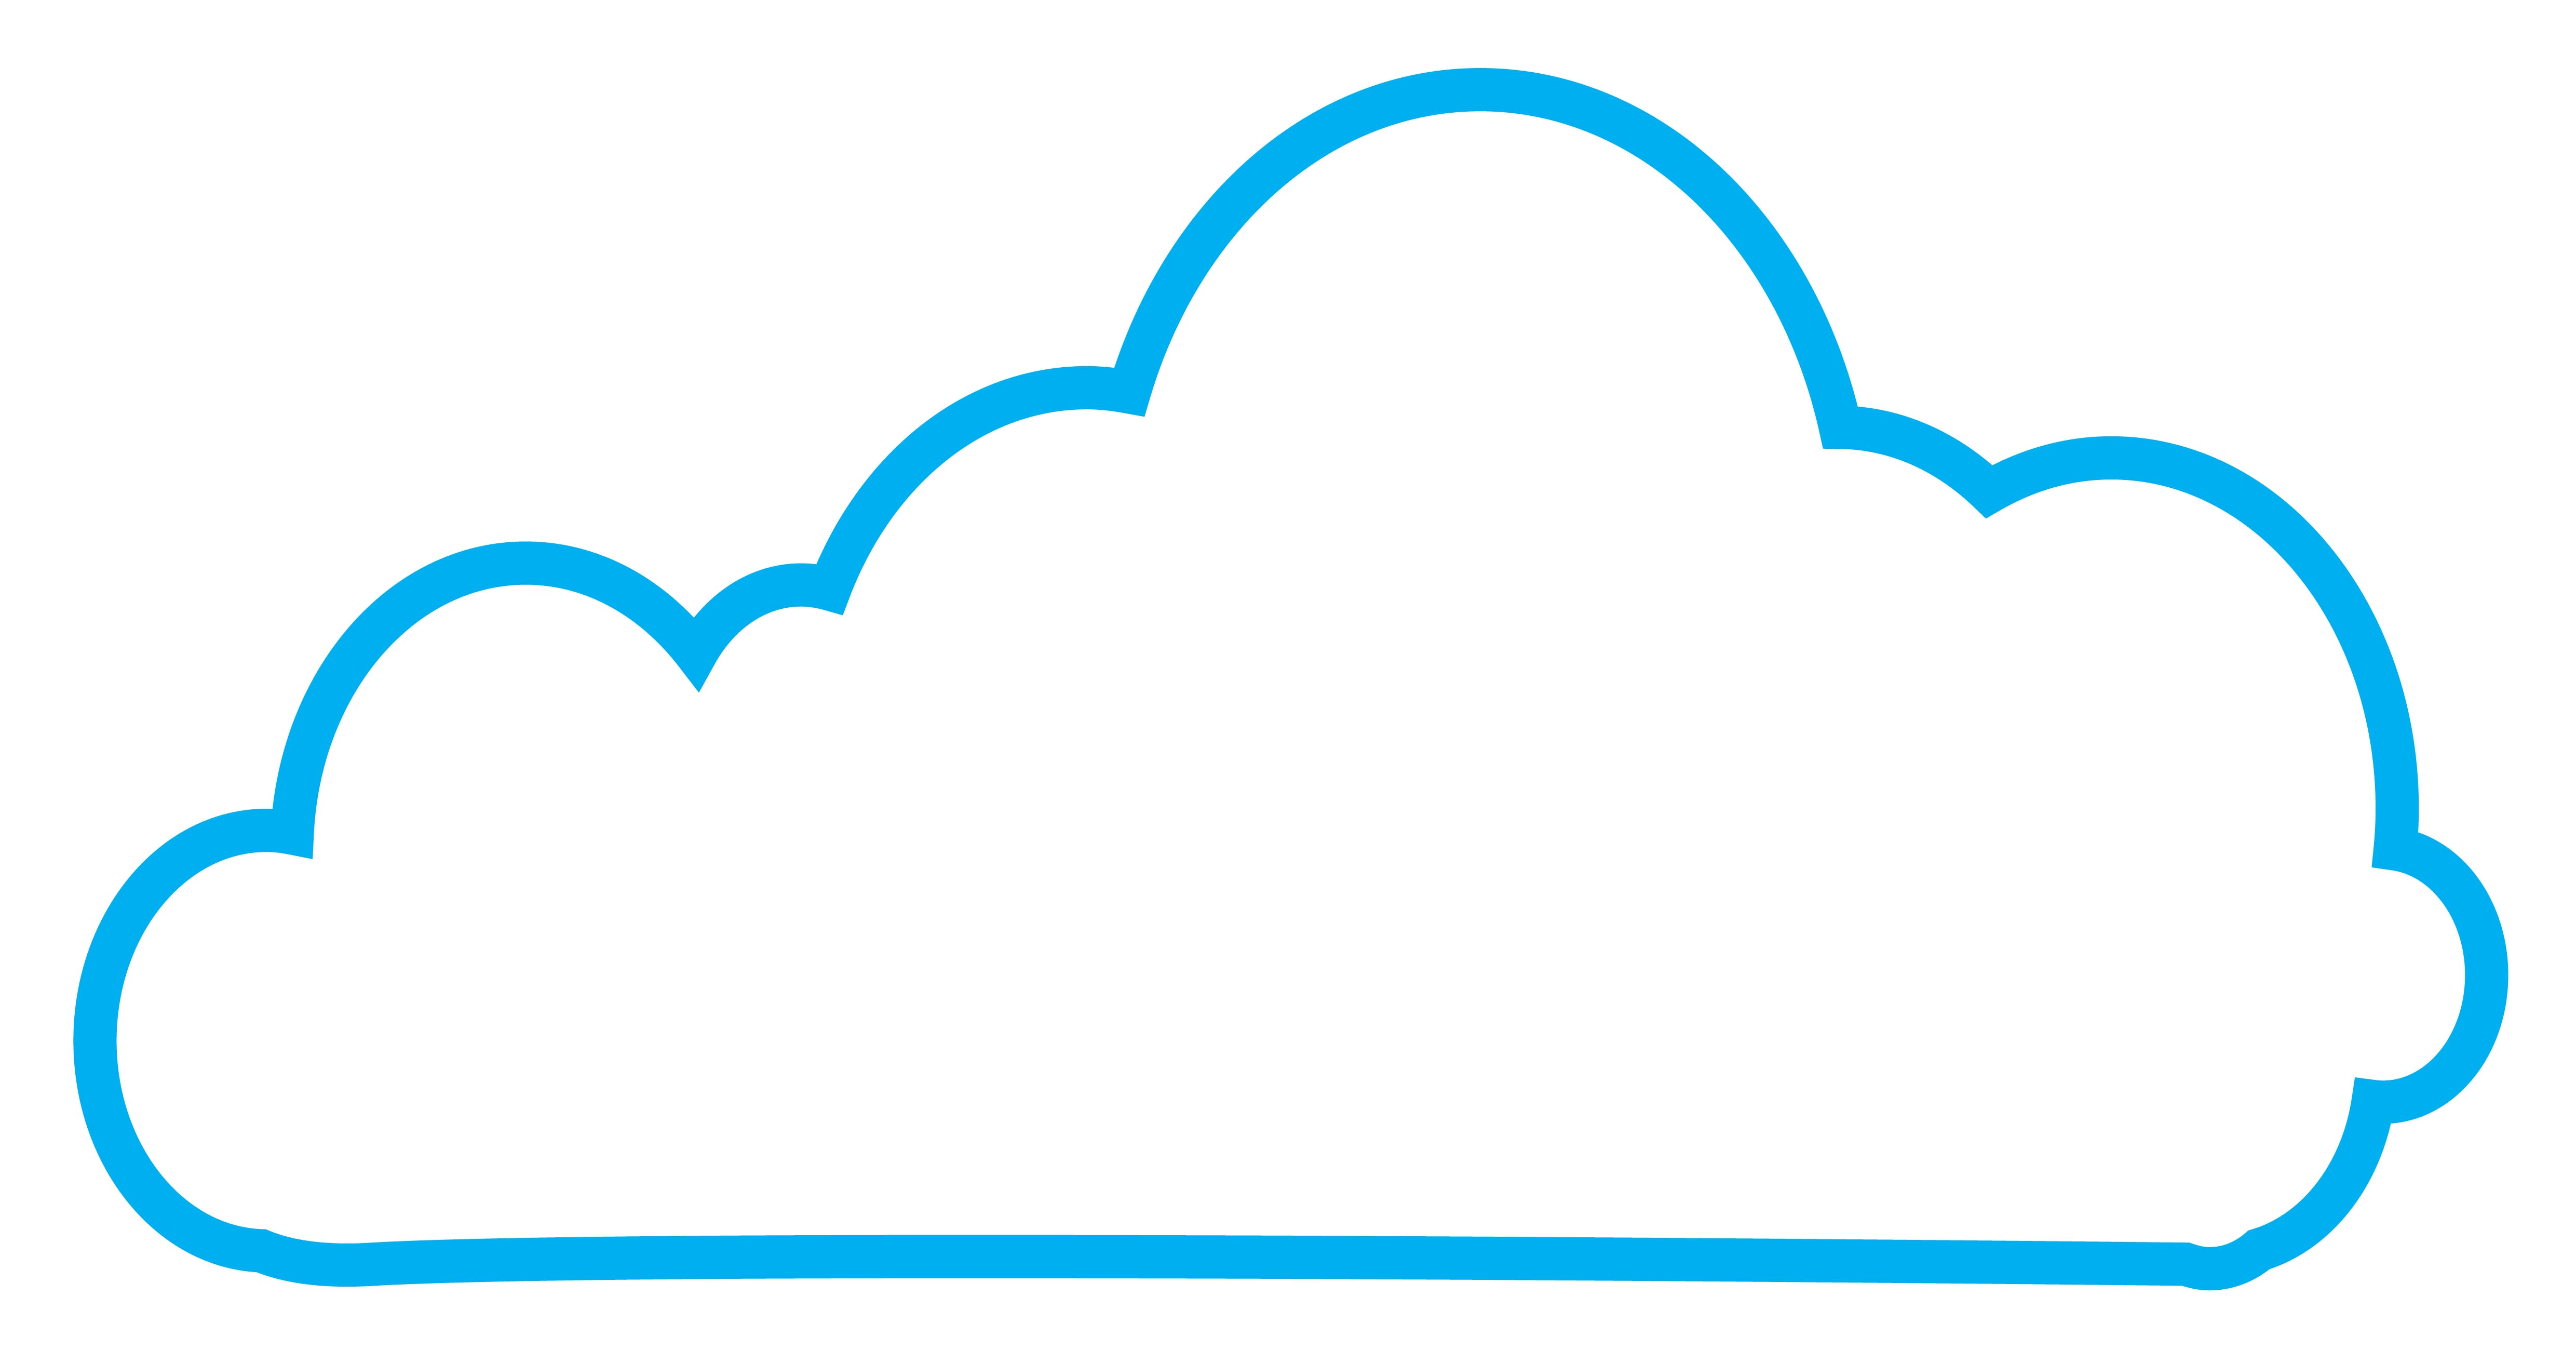 Free Vector Clouds Png, Download Free Clip Art, Free Clip.